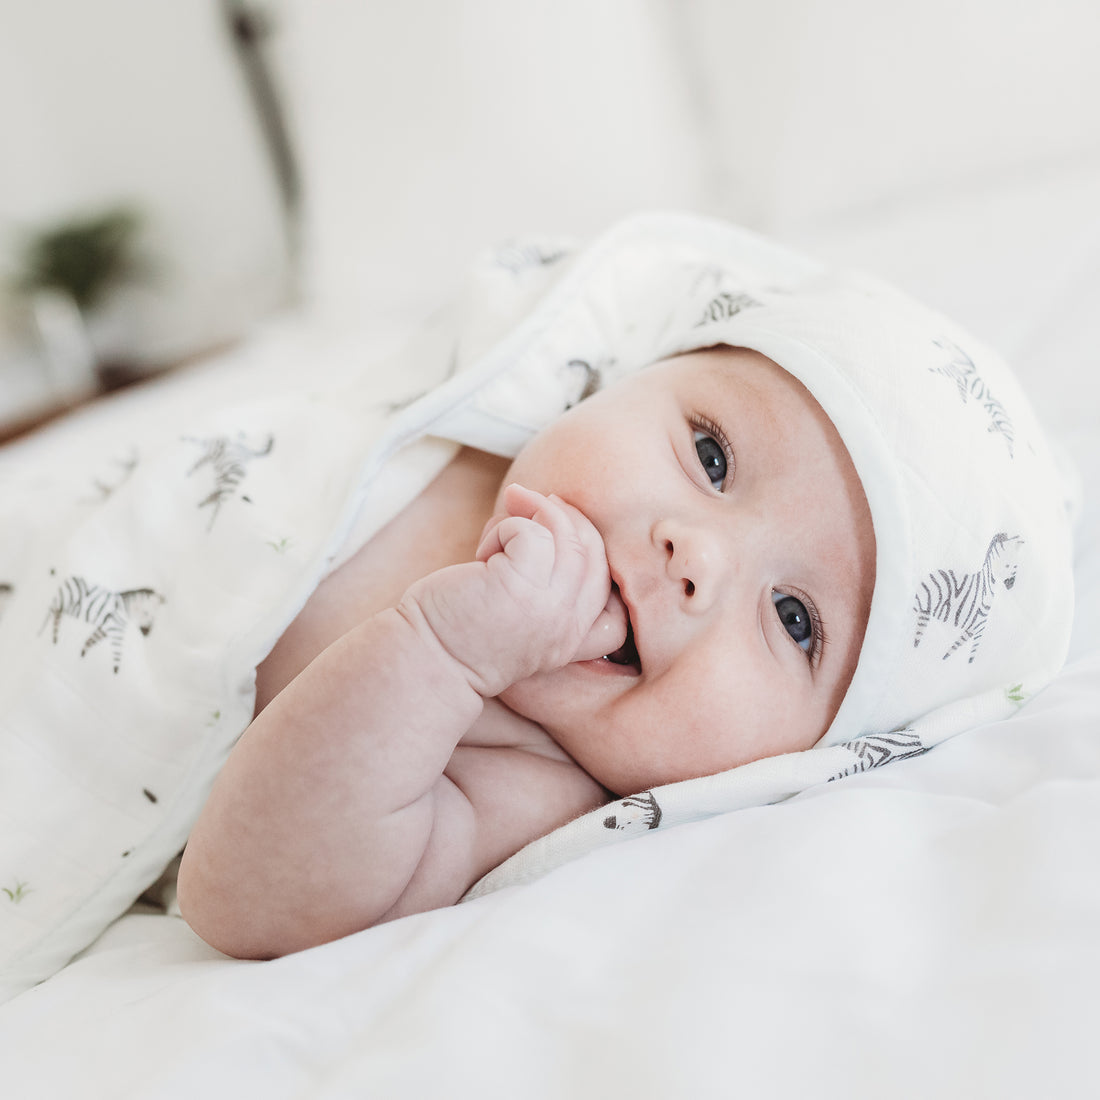 How to Choose the Right Baby Towel